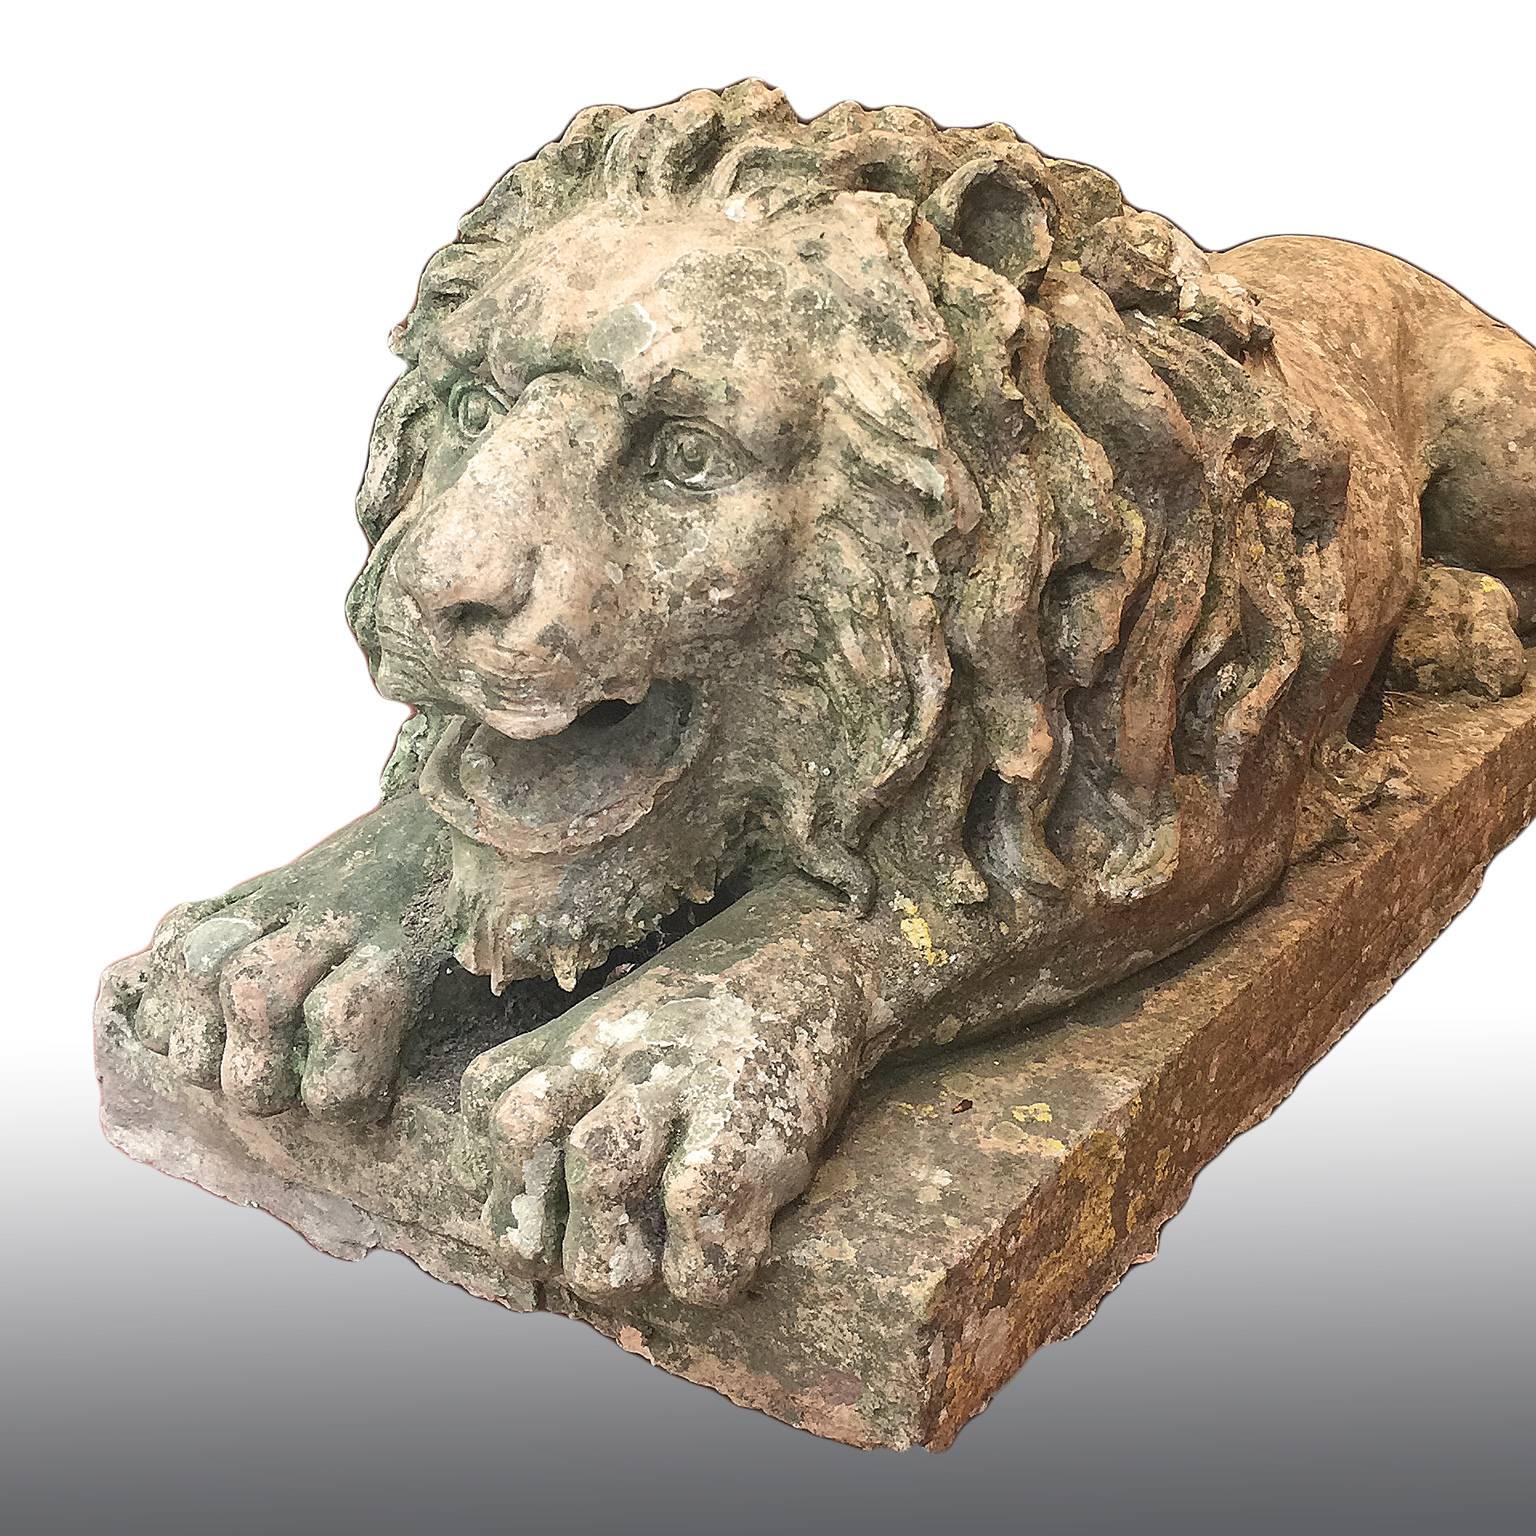 Neoclassical Pair of 18th Century Italian Terracotta Lion Sculptures available separately